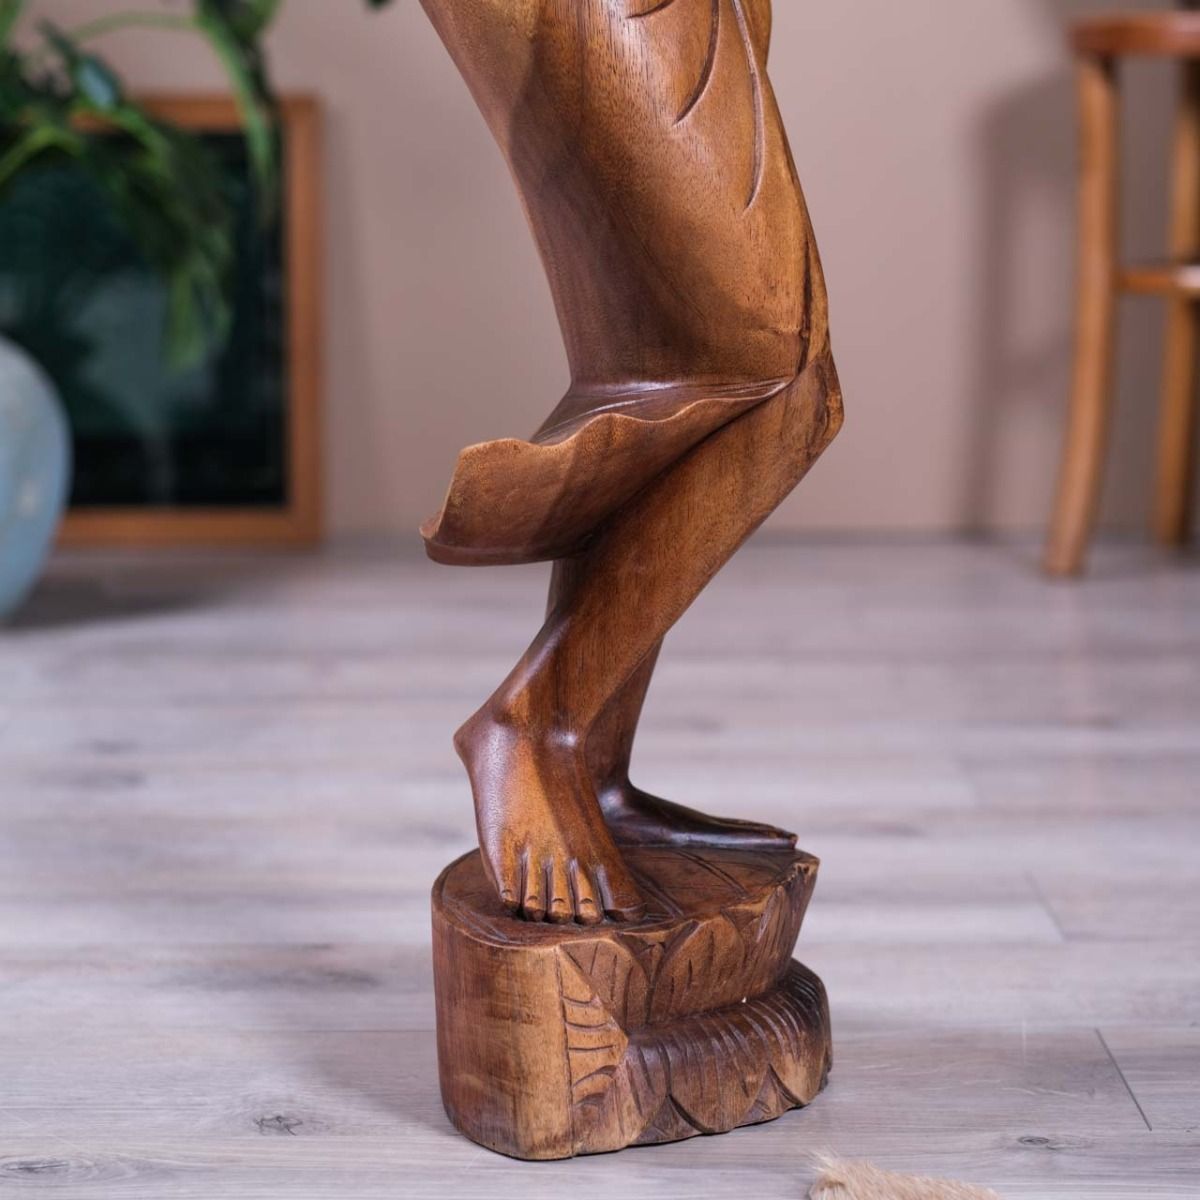 Wooden Sculpture Woman Nude  (Big Size)